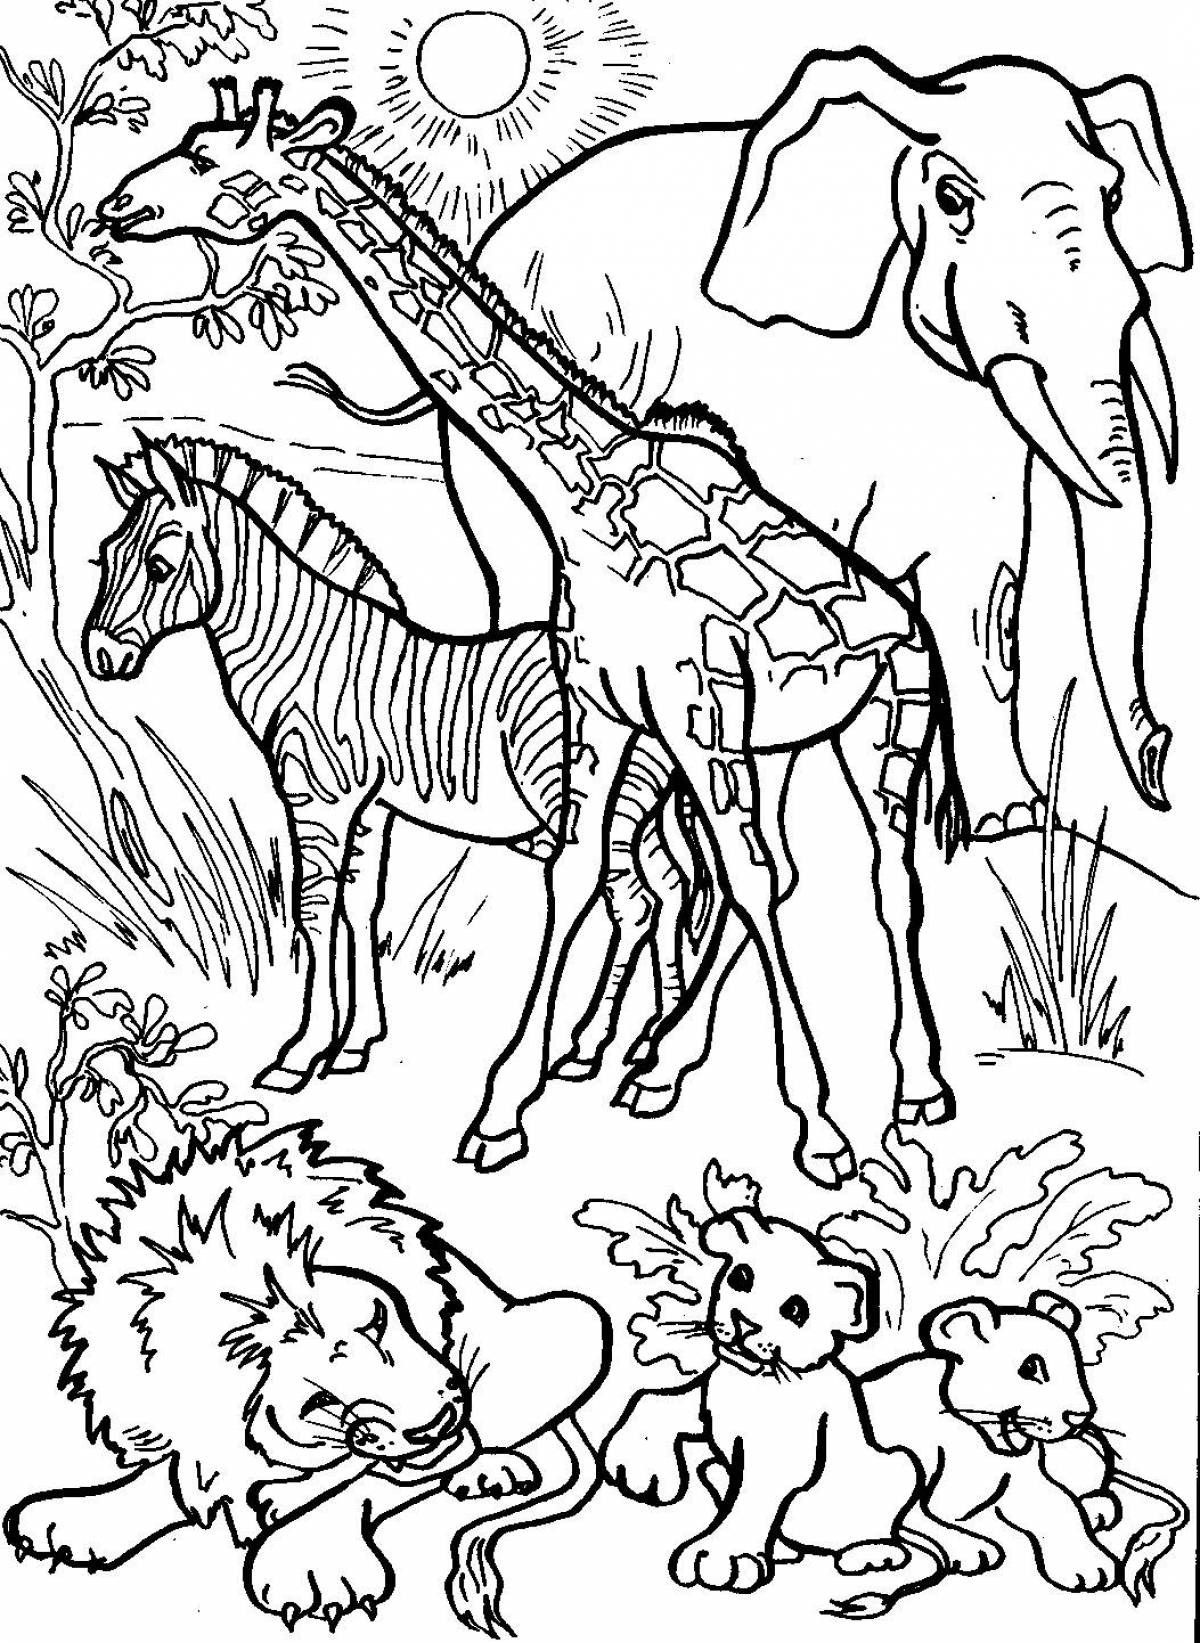 Unique wild animal coloring page for 6-7 year olds